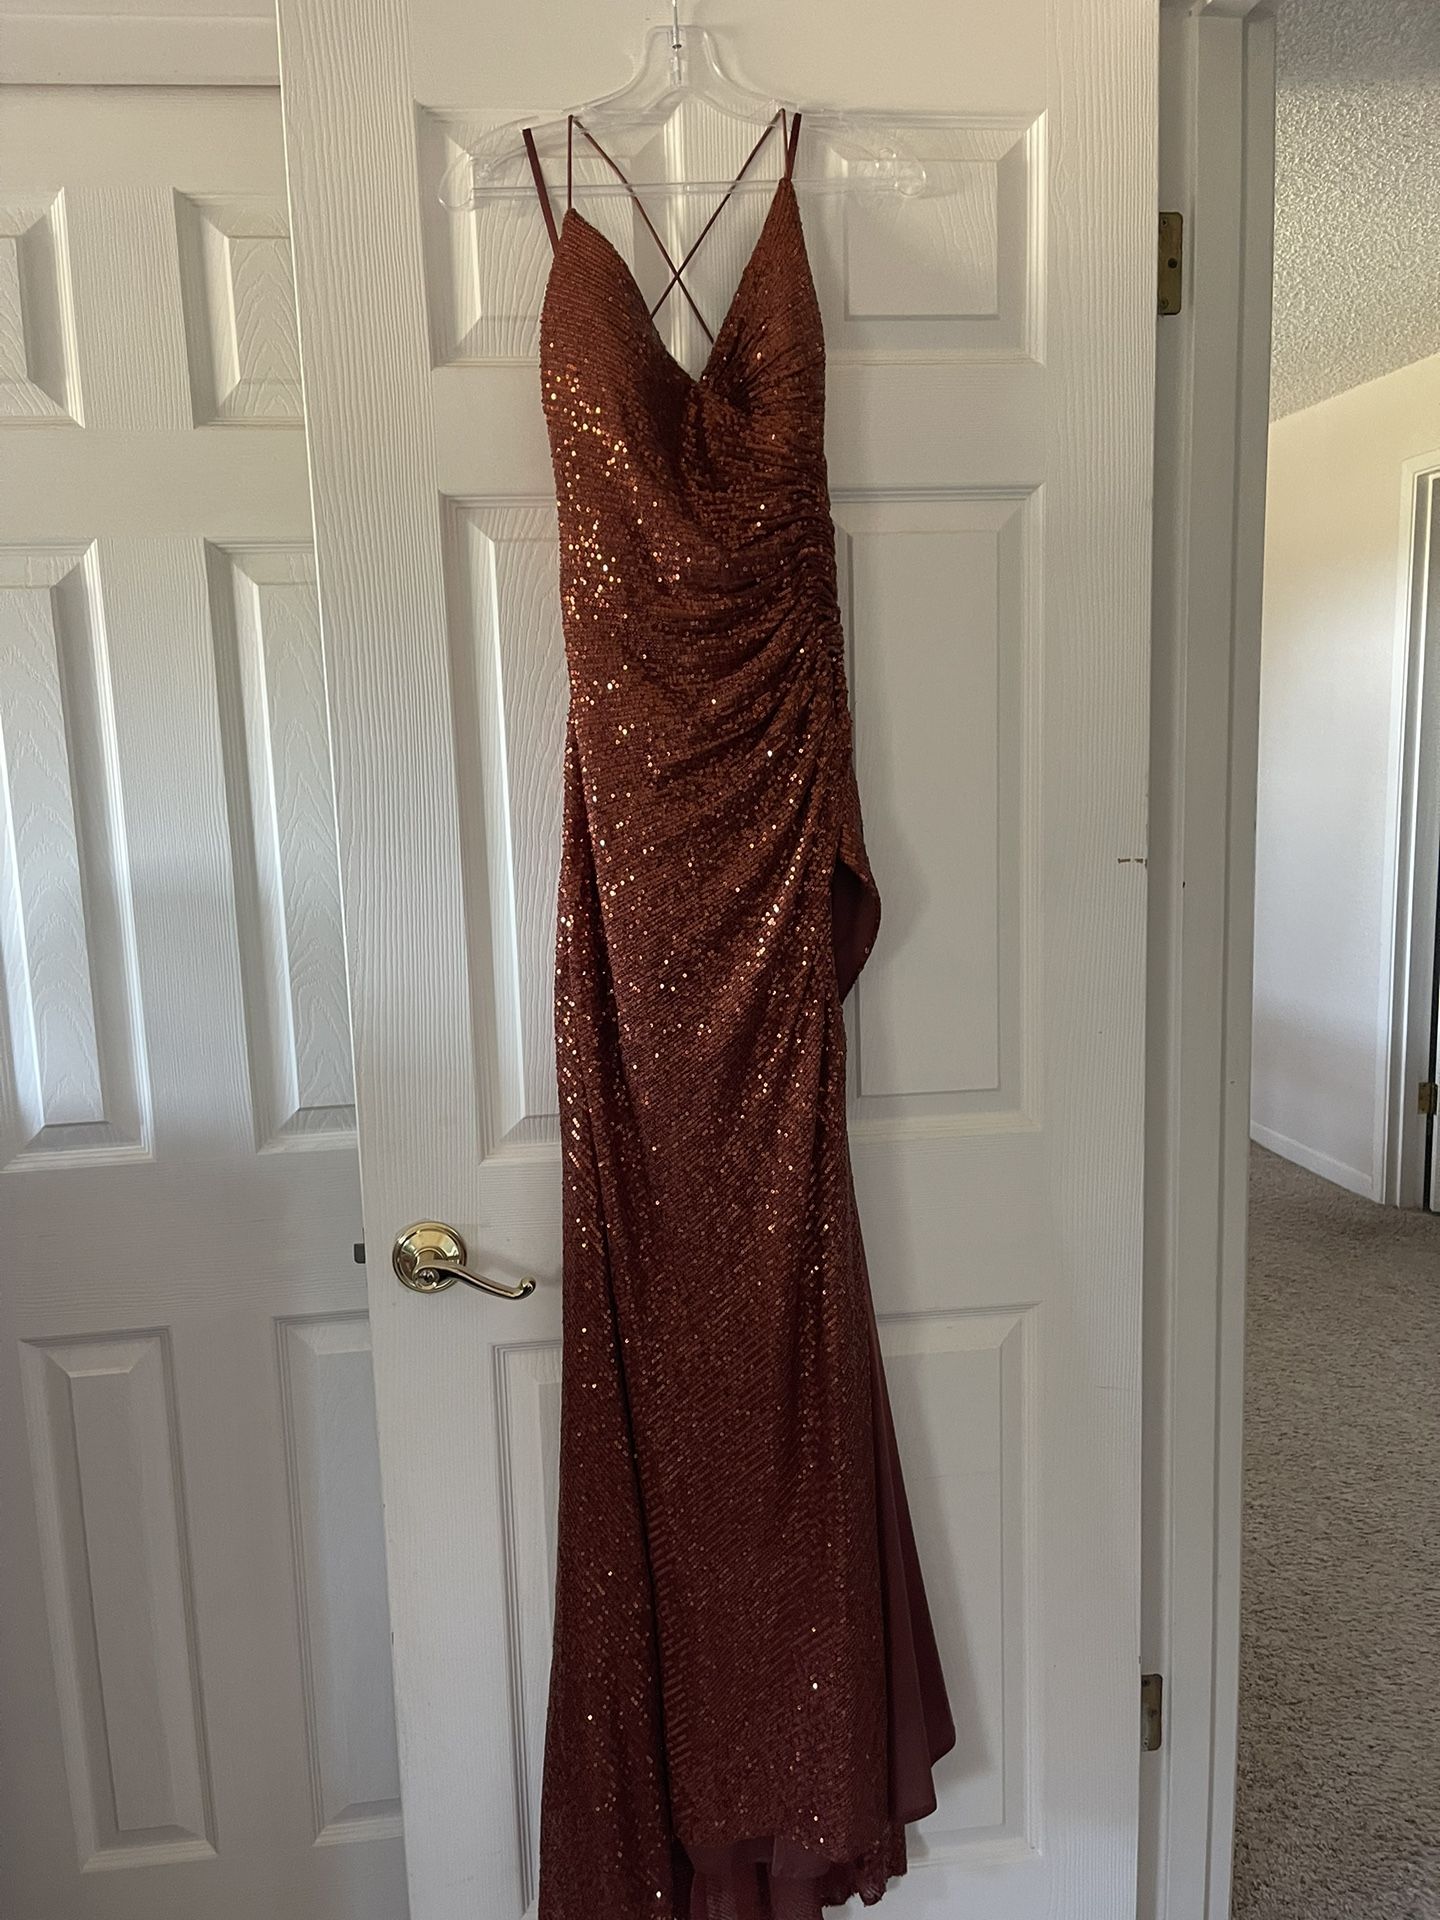 Cinderella divine Copper Satin Sequined High Slit Prom Gown, Size Large